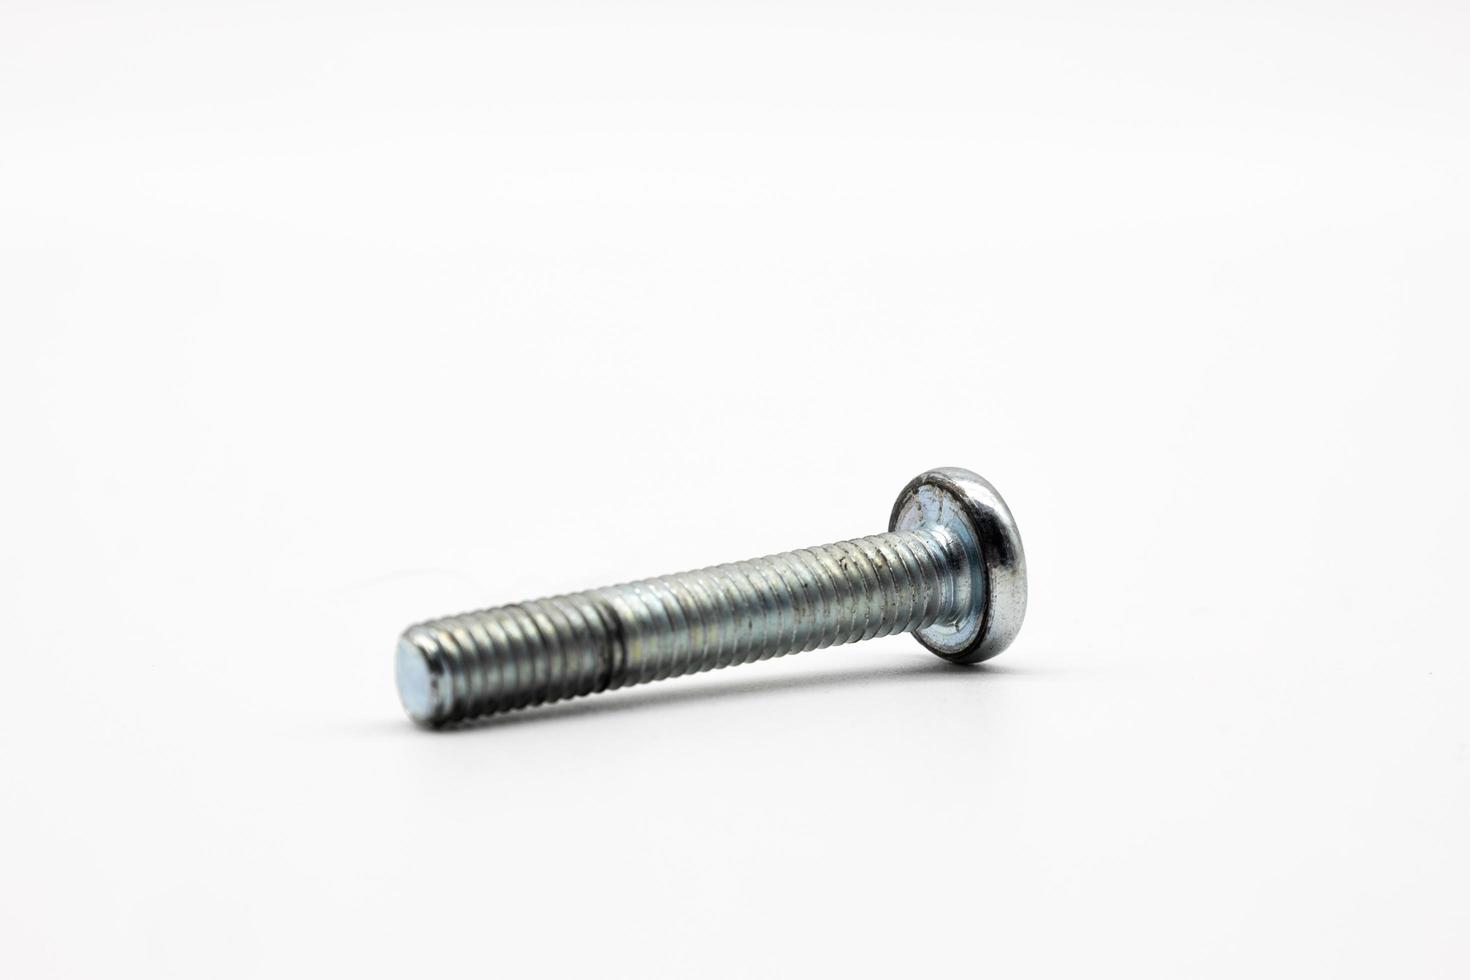 Screw bolt isolated on a white background photo